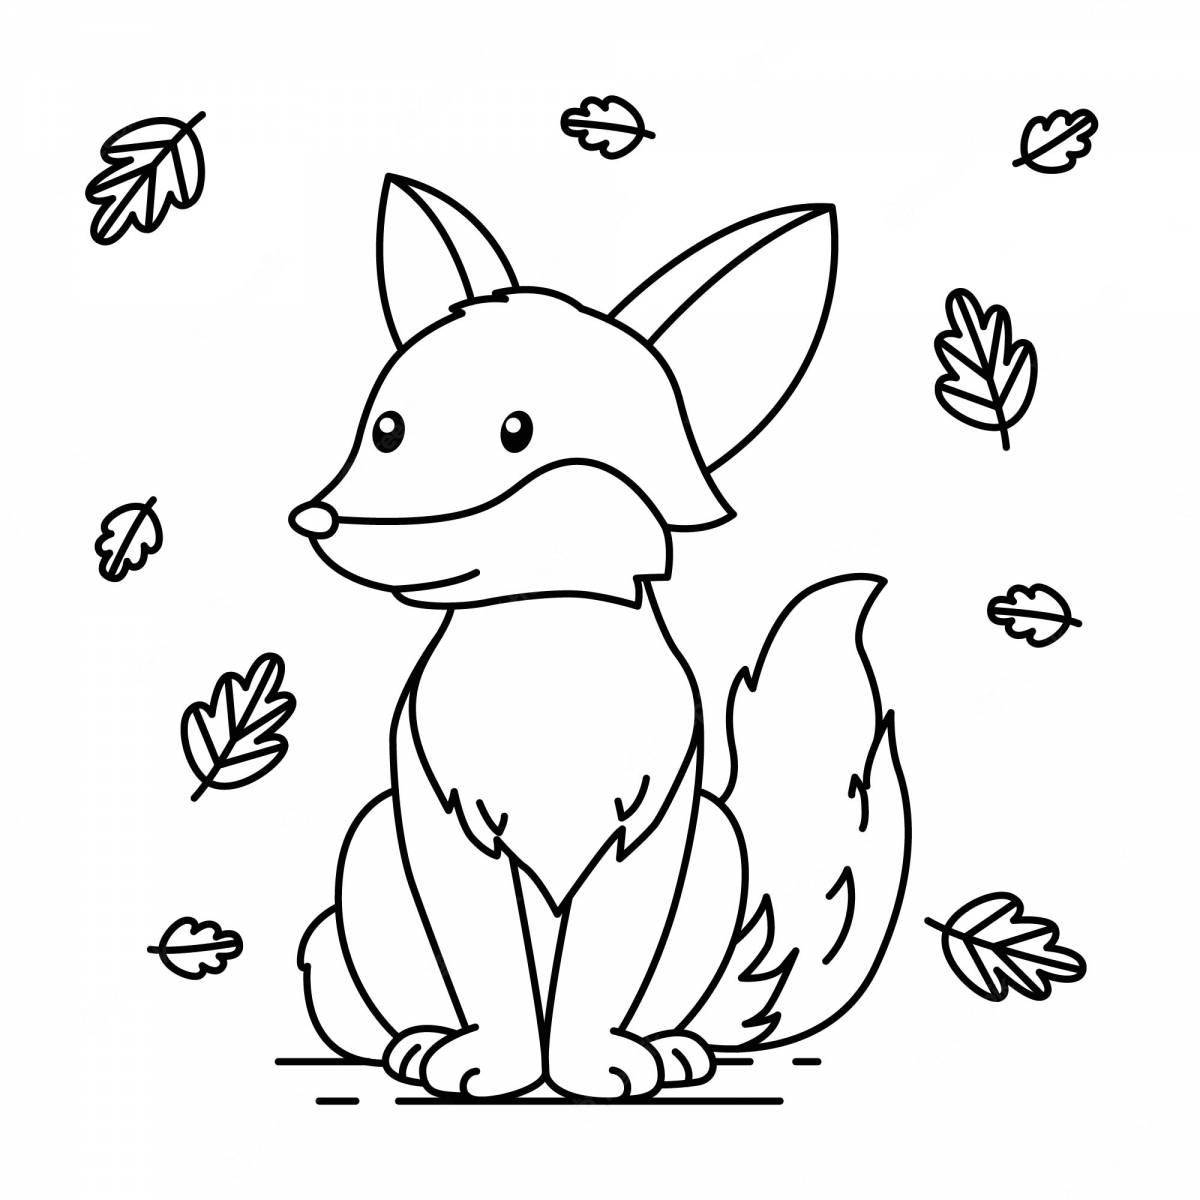 Fun coloring fox for children 2-3 years old